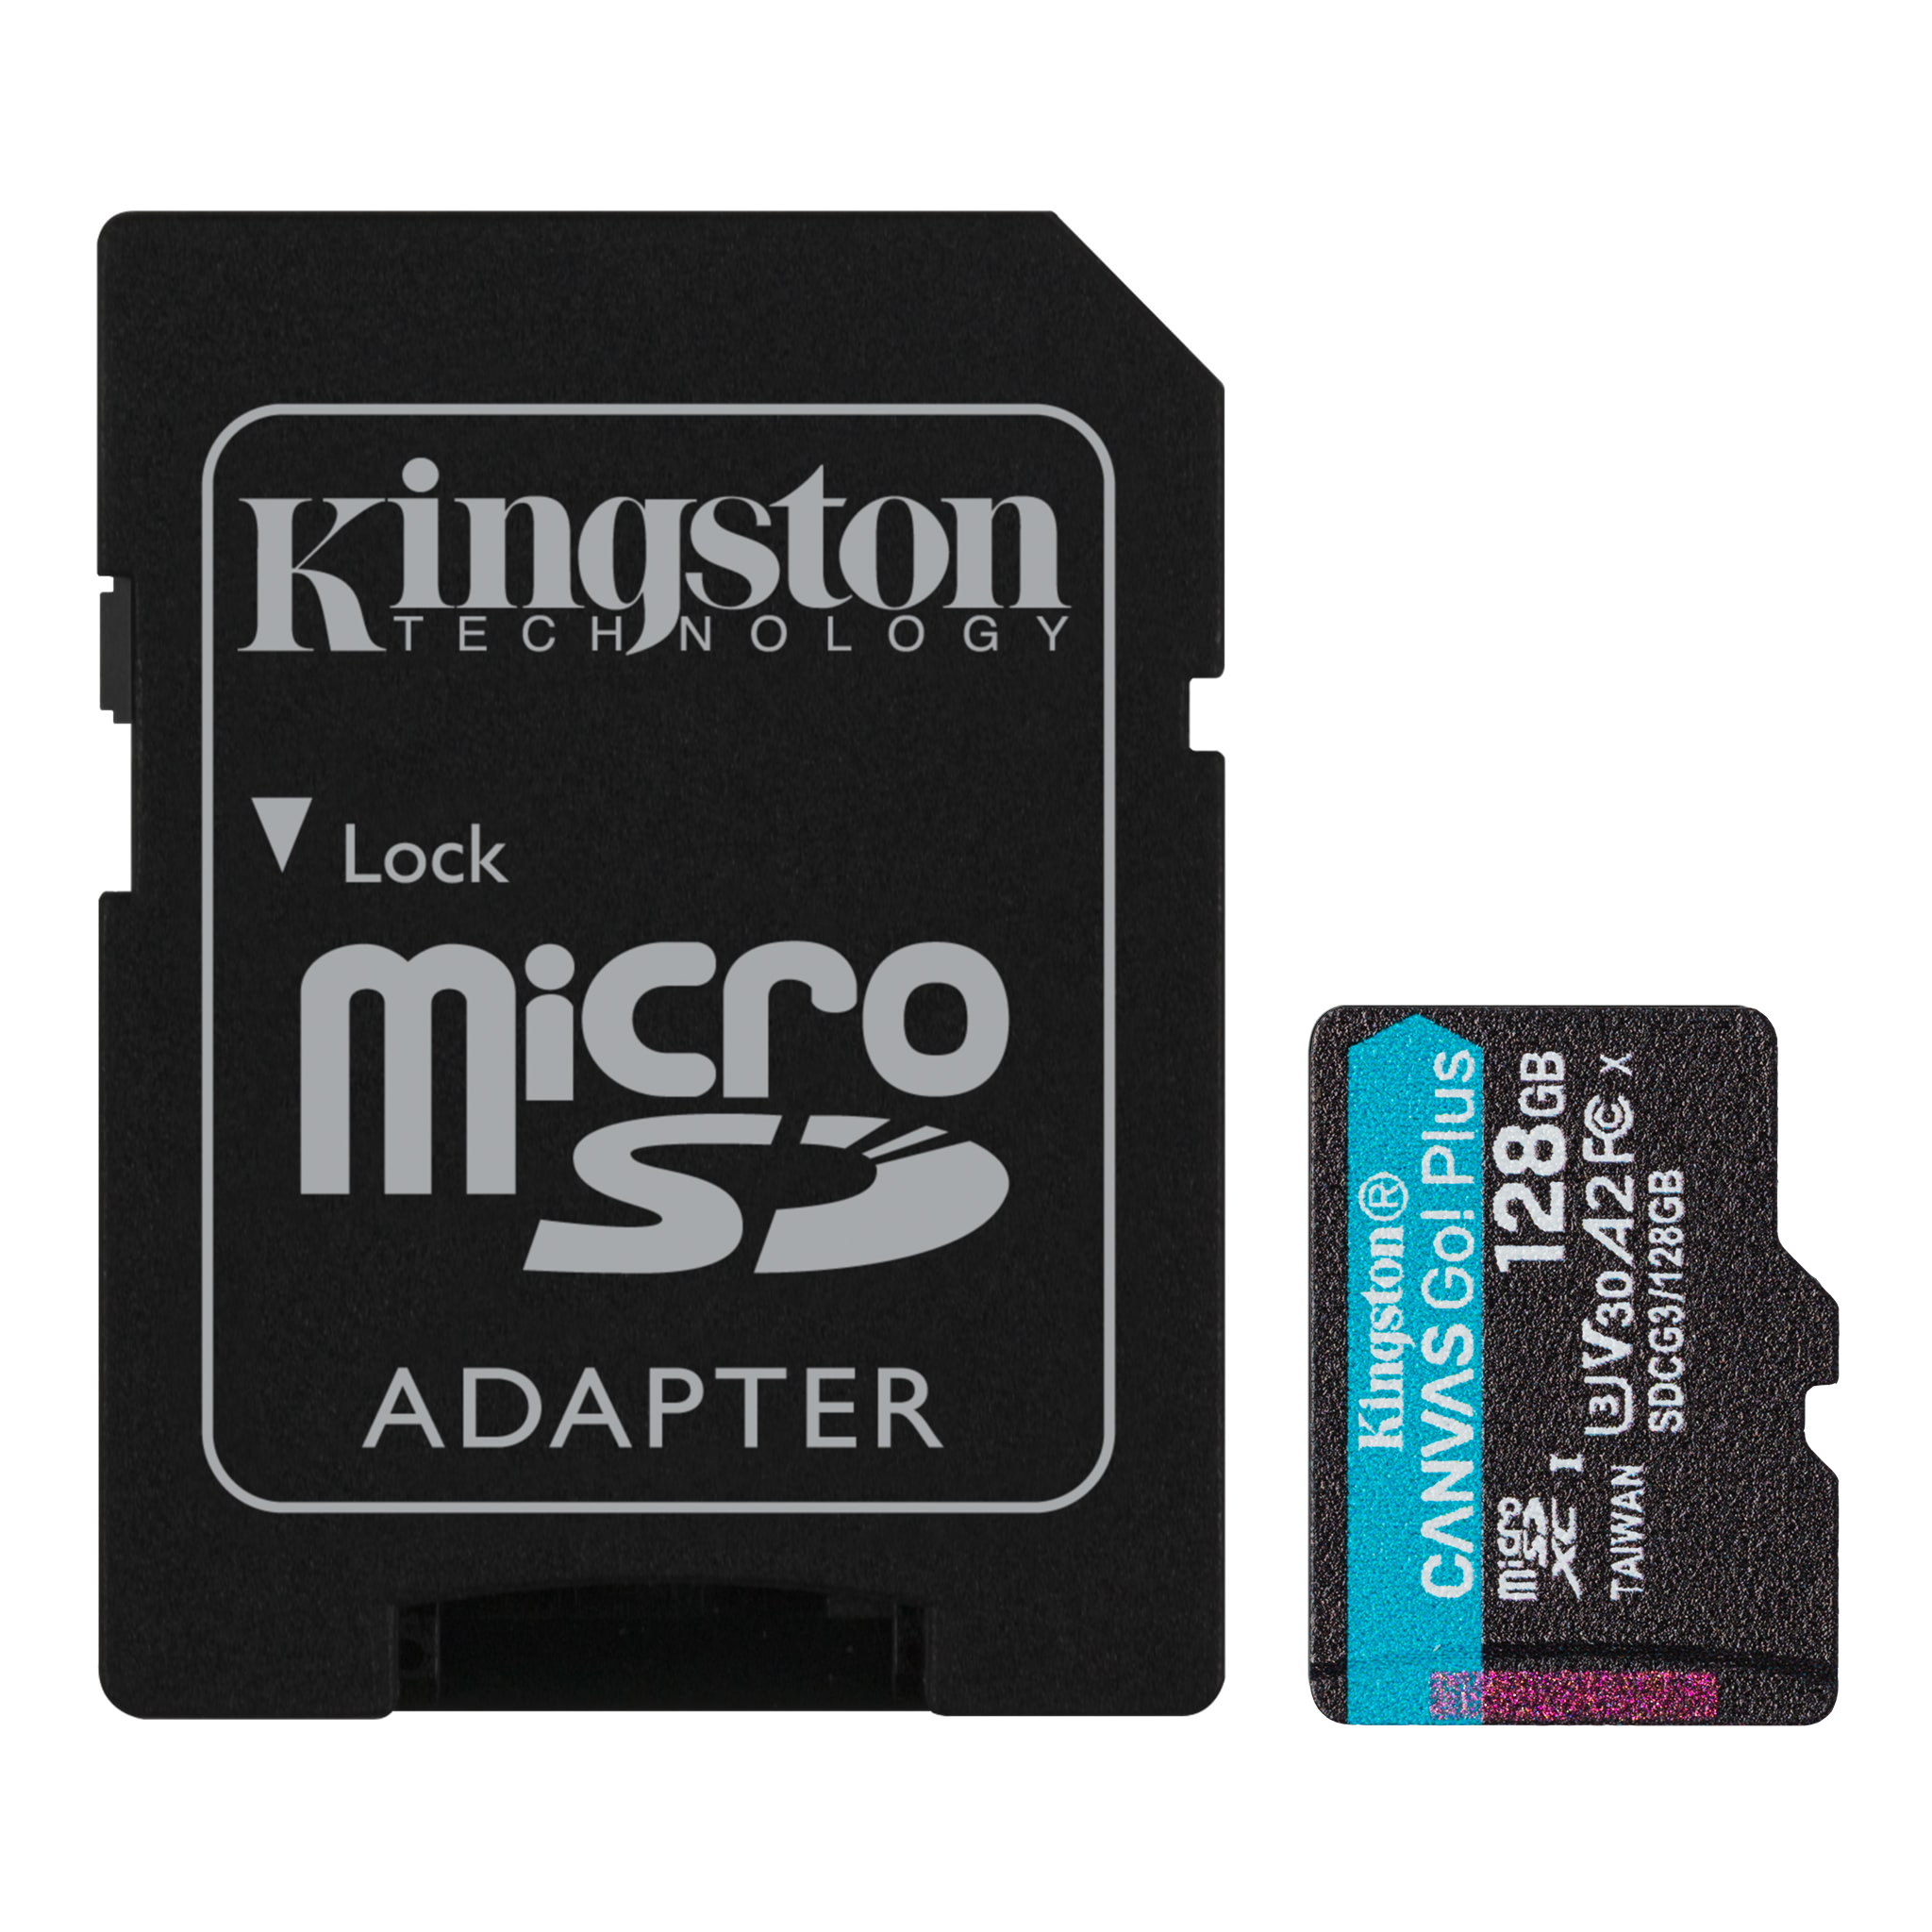 Kingston 32GB LG G6 Plus MicroSDHC Canvas Select Plus Card Verified by SanFlash. 100MBs Works with Kingston